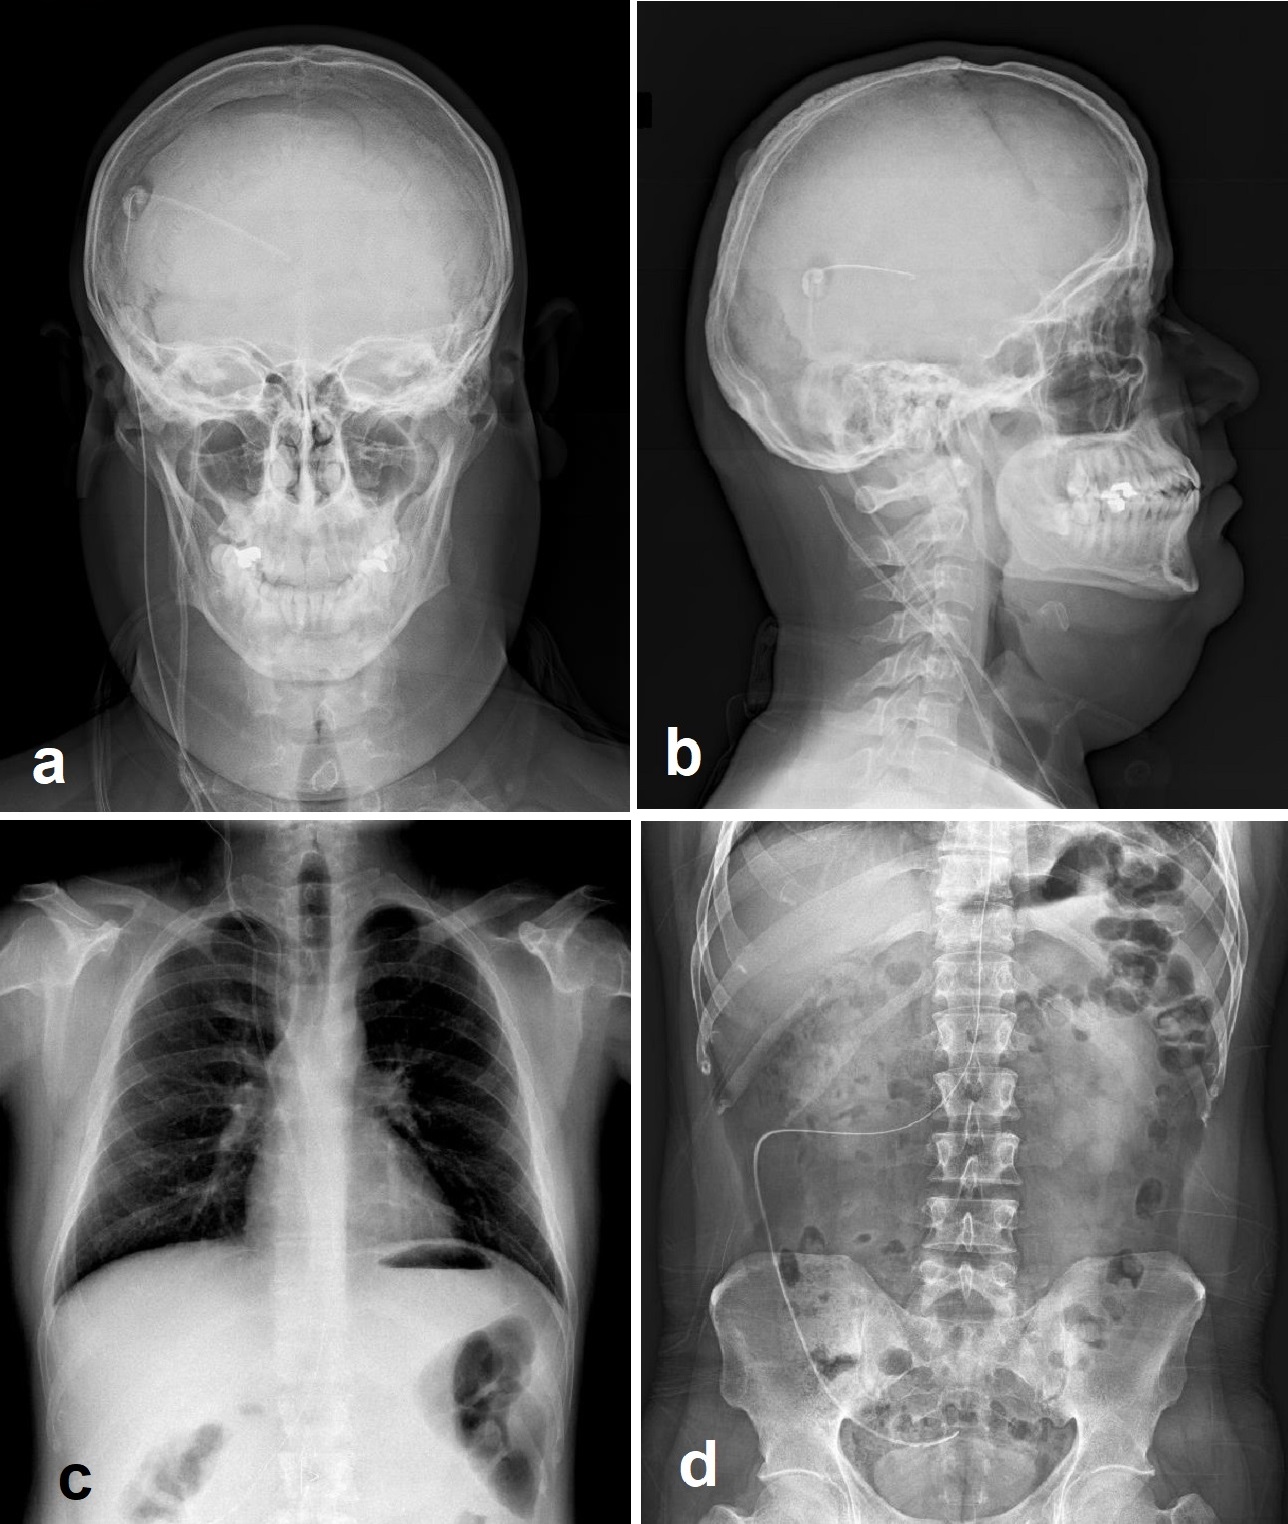 Shunt series including biplanar head (a and b), anteroposterior chest (c) and anteroposterior abdominal (d) radiographs demonstrating the ventriculoperitoneal shunt catheter throughout its course